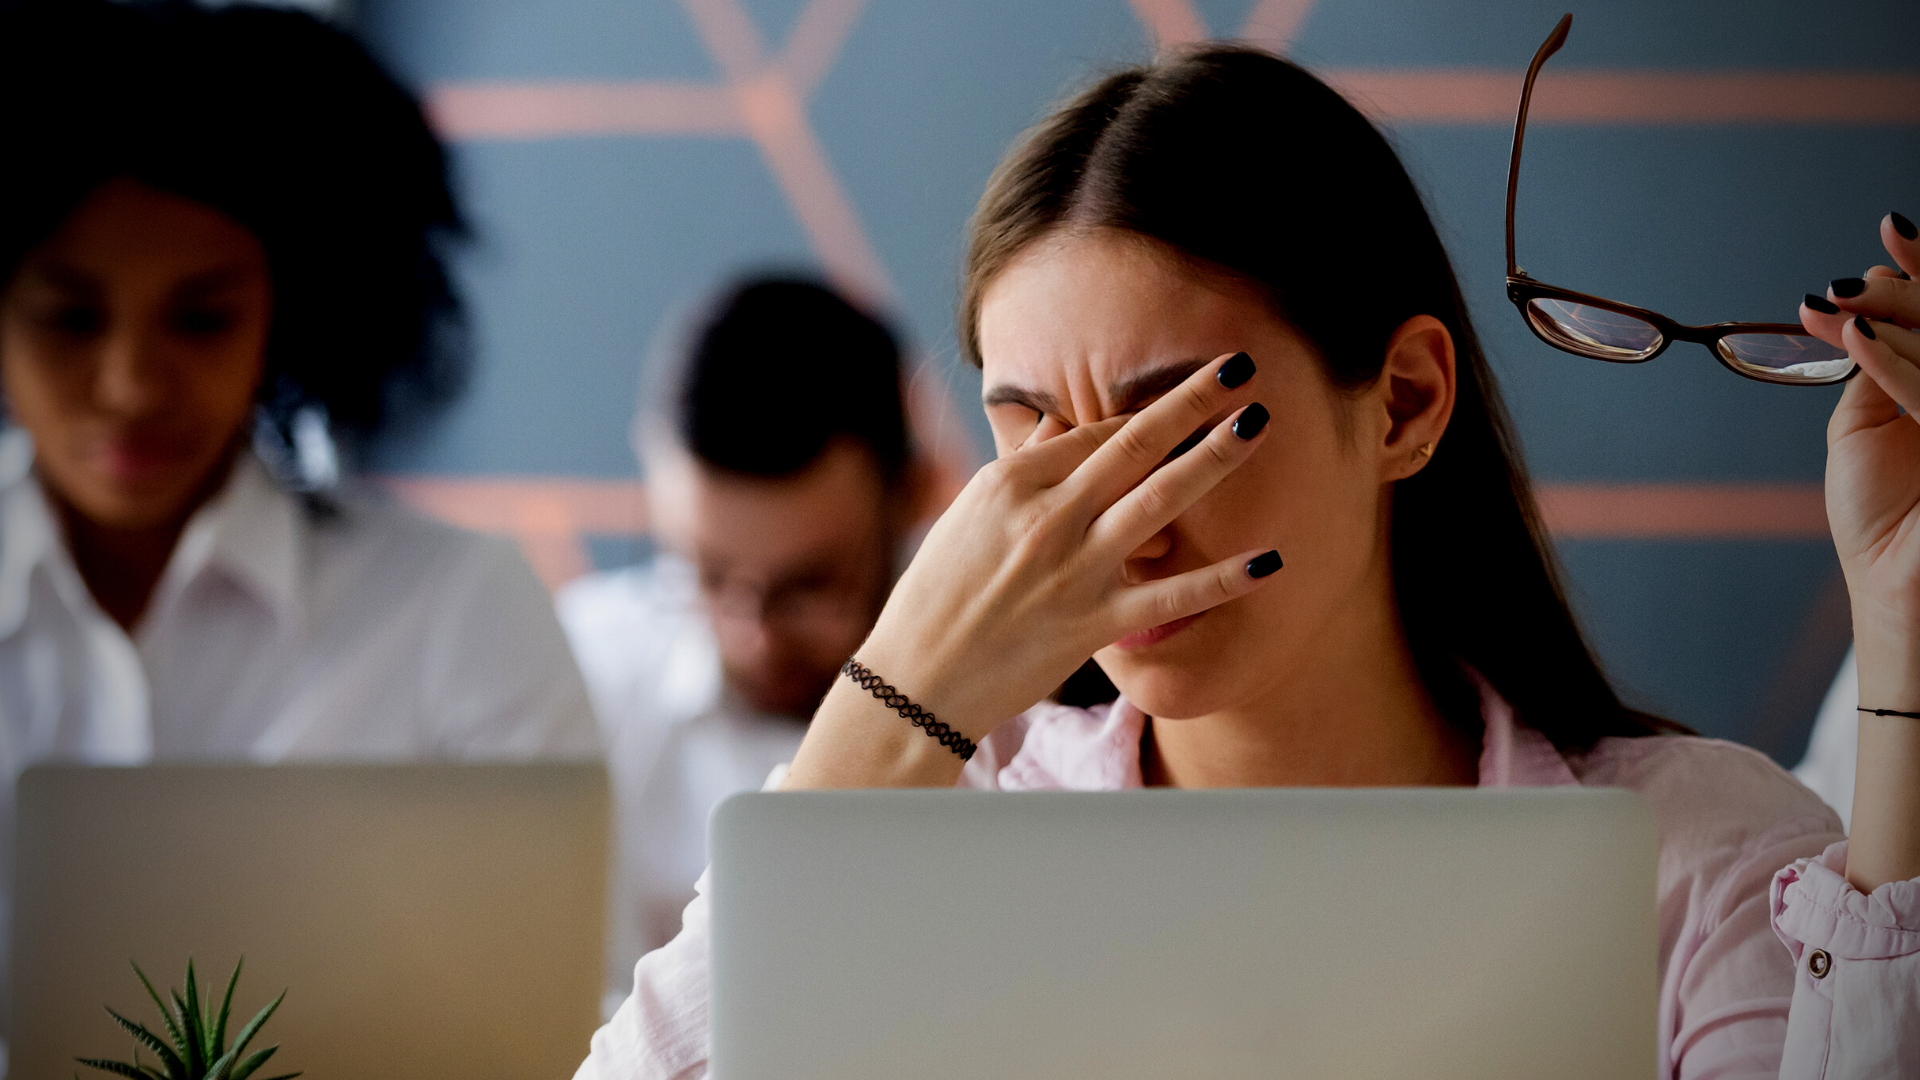 woman rubbing her eyes from computer use - reducing computer screen eye strain